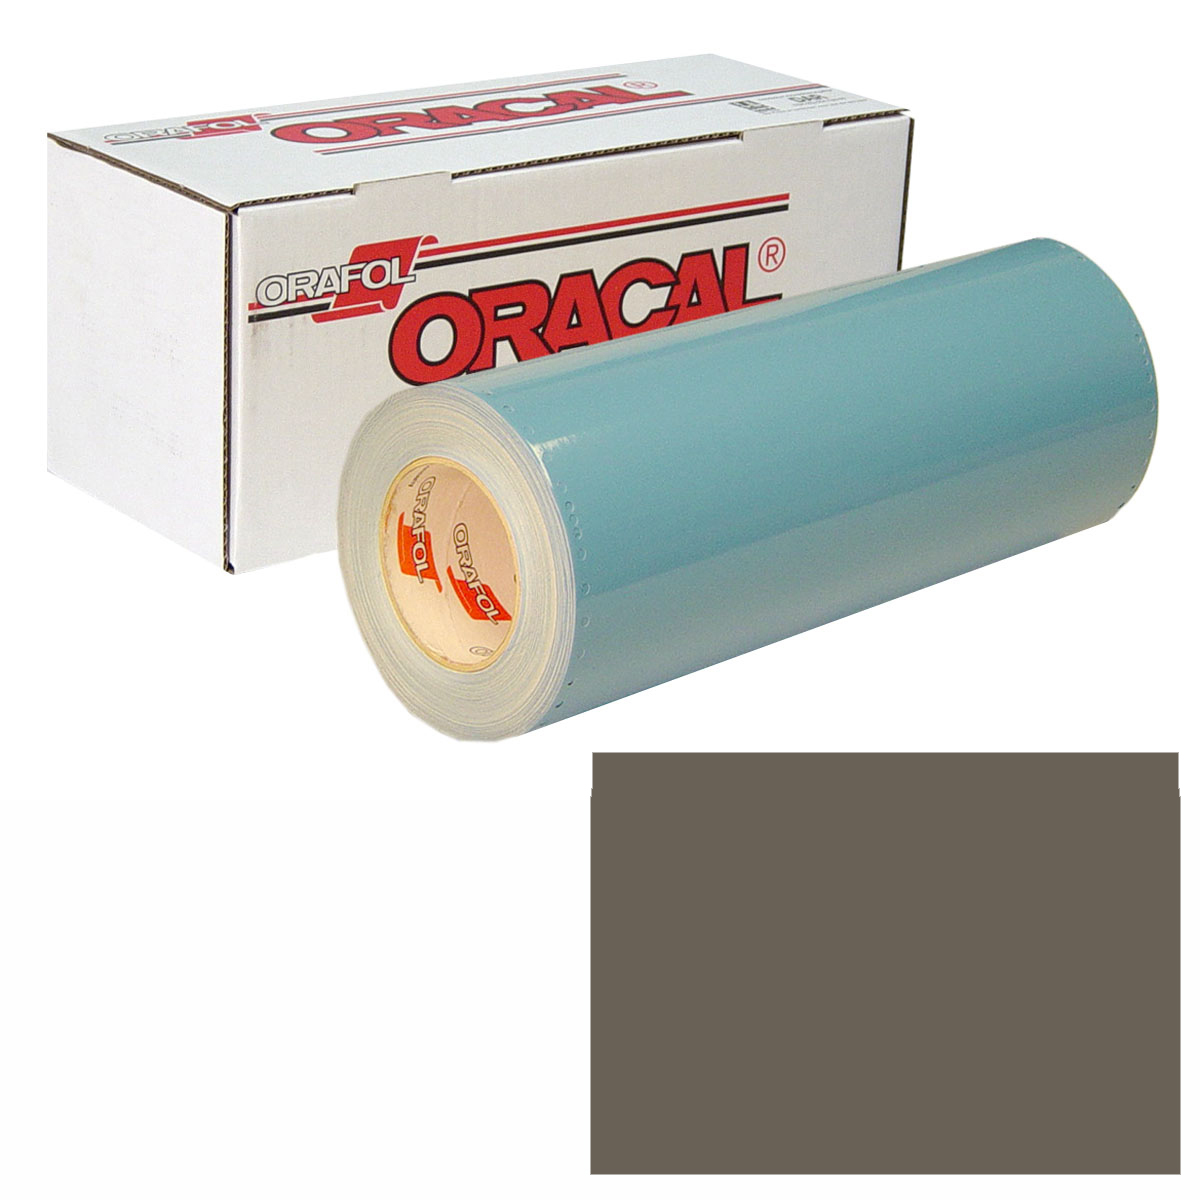 ORACAL 751 15in X 50yd 093 Anthracite